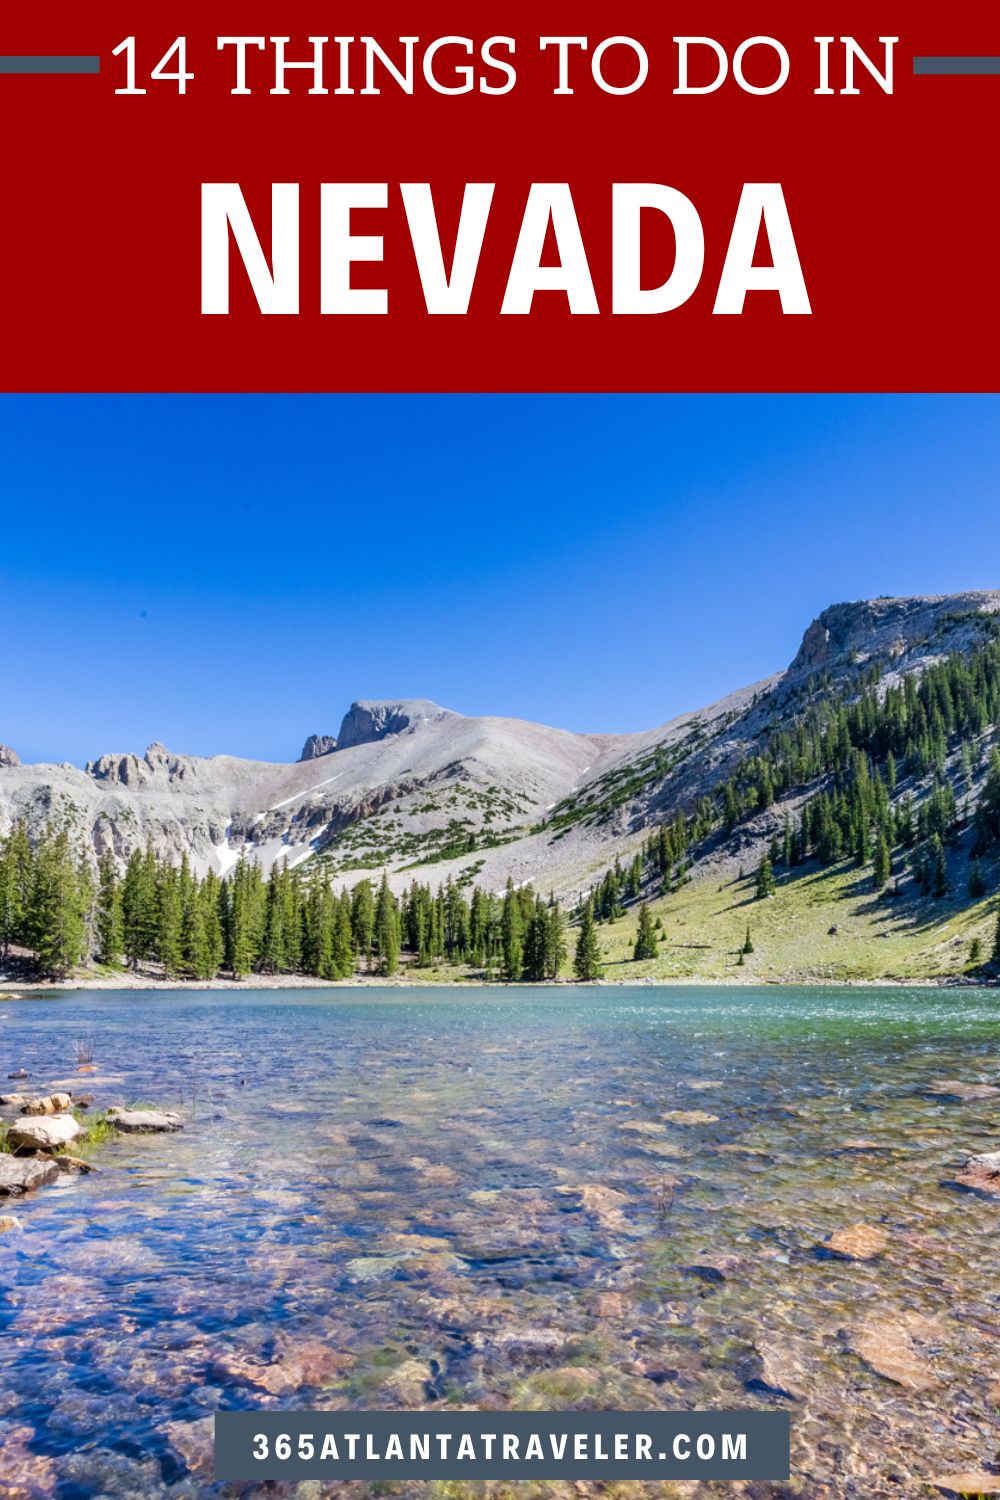 14 Things To Do in Nevada (Besides Las Vegas)